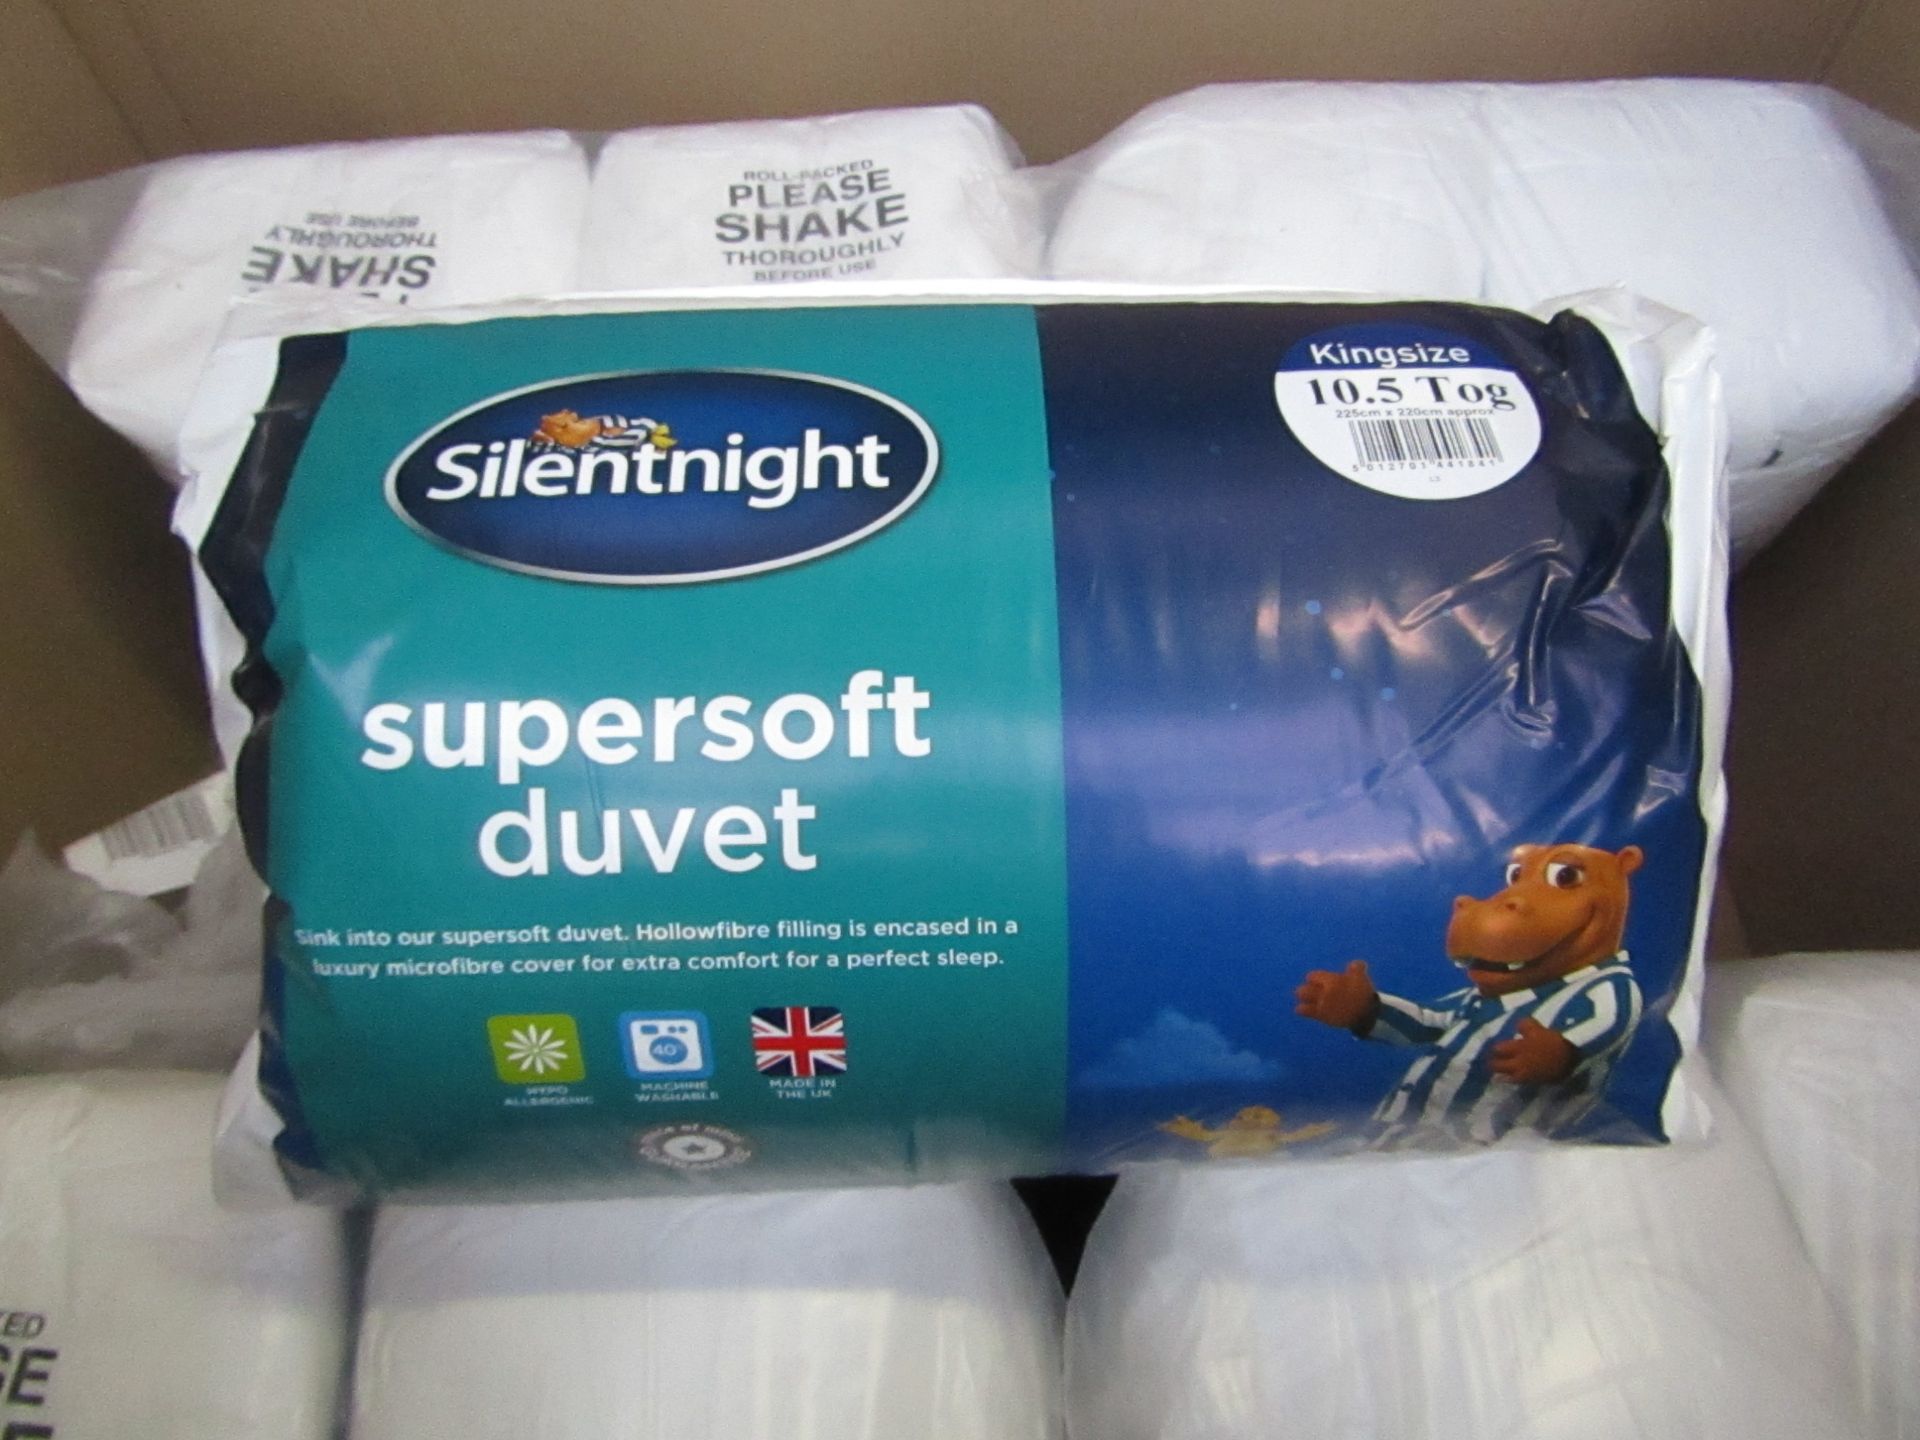 4x Silentnight Supersoft duvet, kingsize, 10.5 Tog, all brand new and packaged. Each RRP £24.99